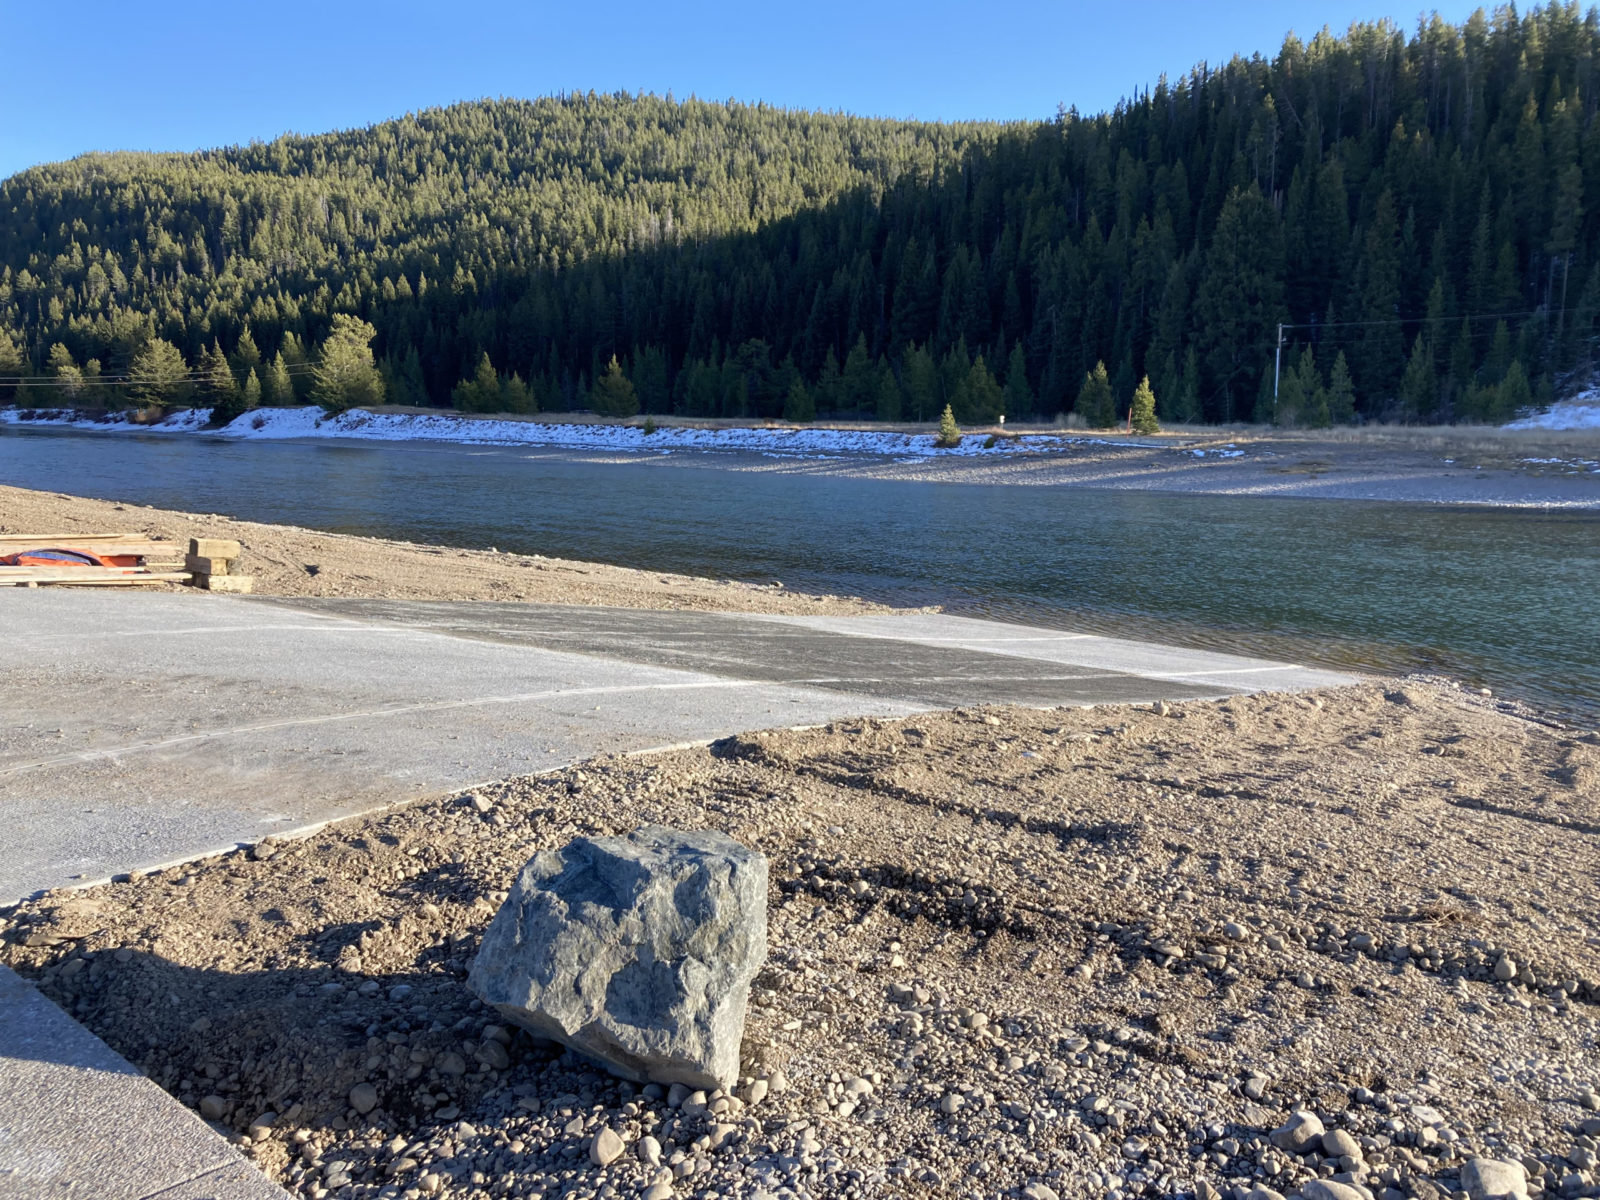 A new, two-lane boat ramp will allow recreationists to launch their watercraft safely and efficiently. Prior to this project, visitors had to push their boats down a steep gravel slope to get them in the water.